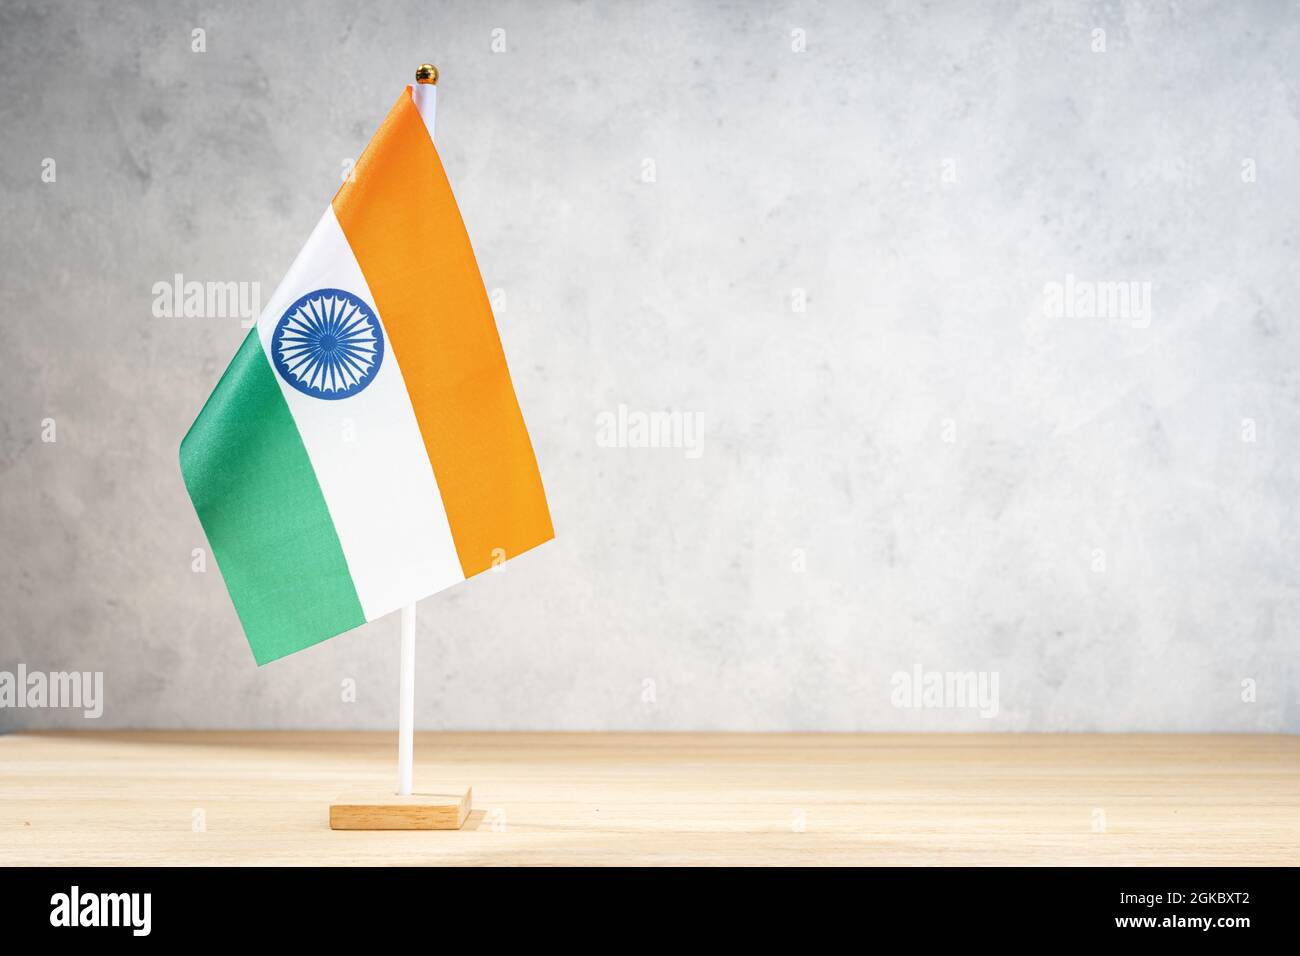 India table flag on white textured wall. Copy space for text, designs or drawings Stock Photo